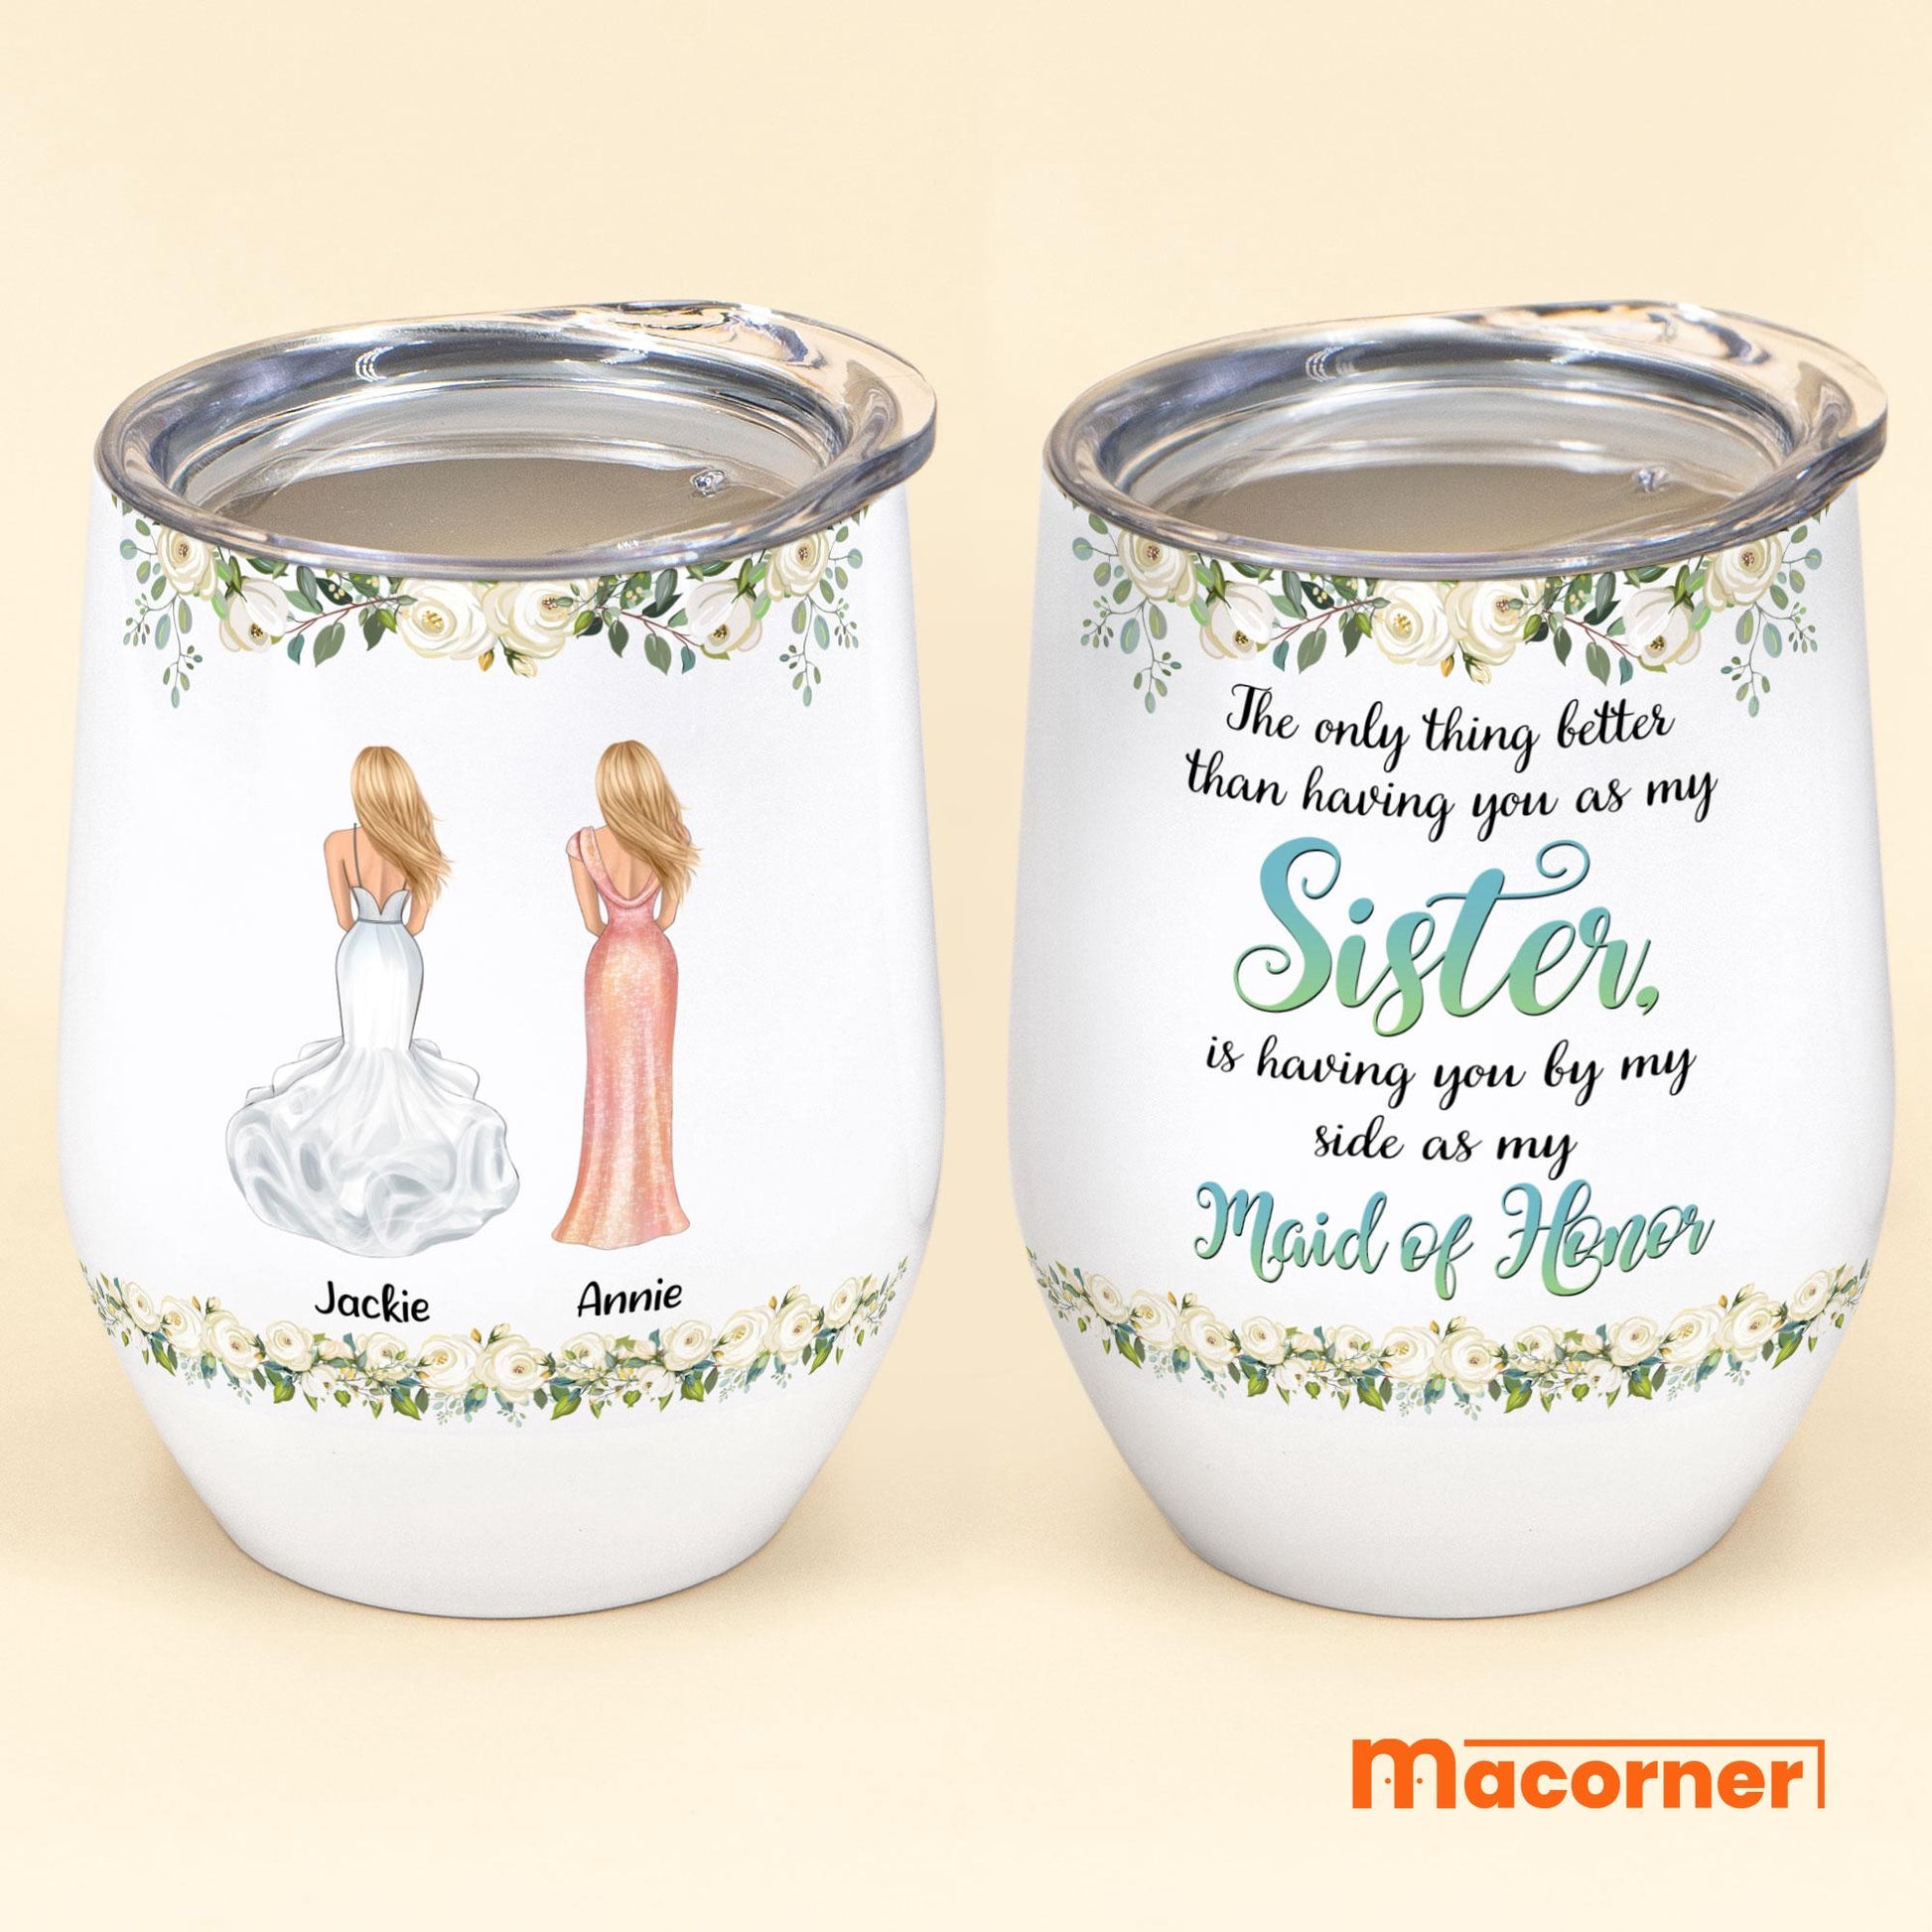 By-My-Side-As-My-Maid-Of-Honor-Personalized-Wine-Tumbler-Wedding-Gift-For-Friends-For-Bridesmaids